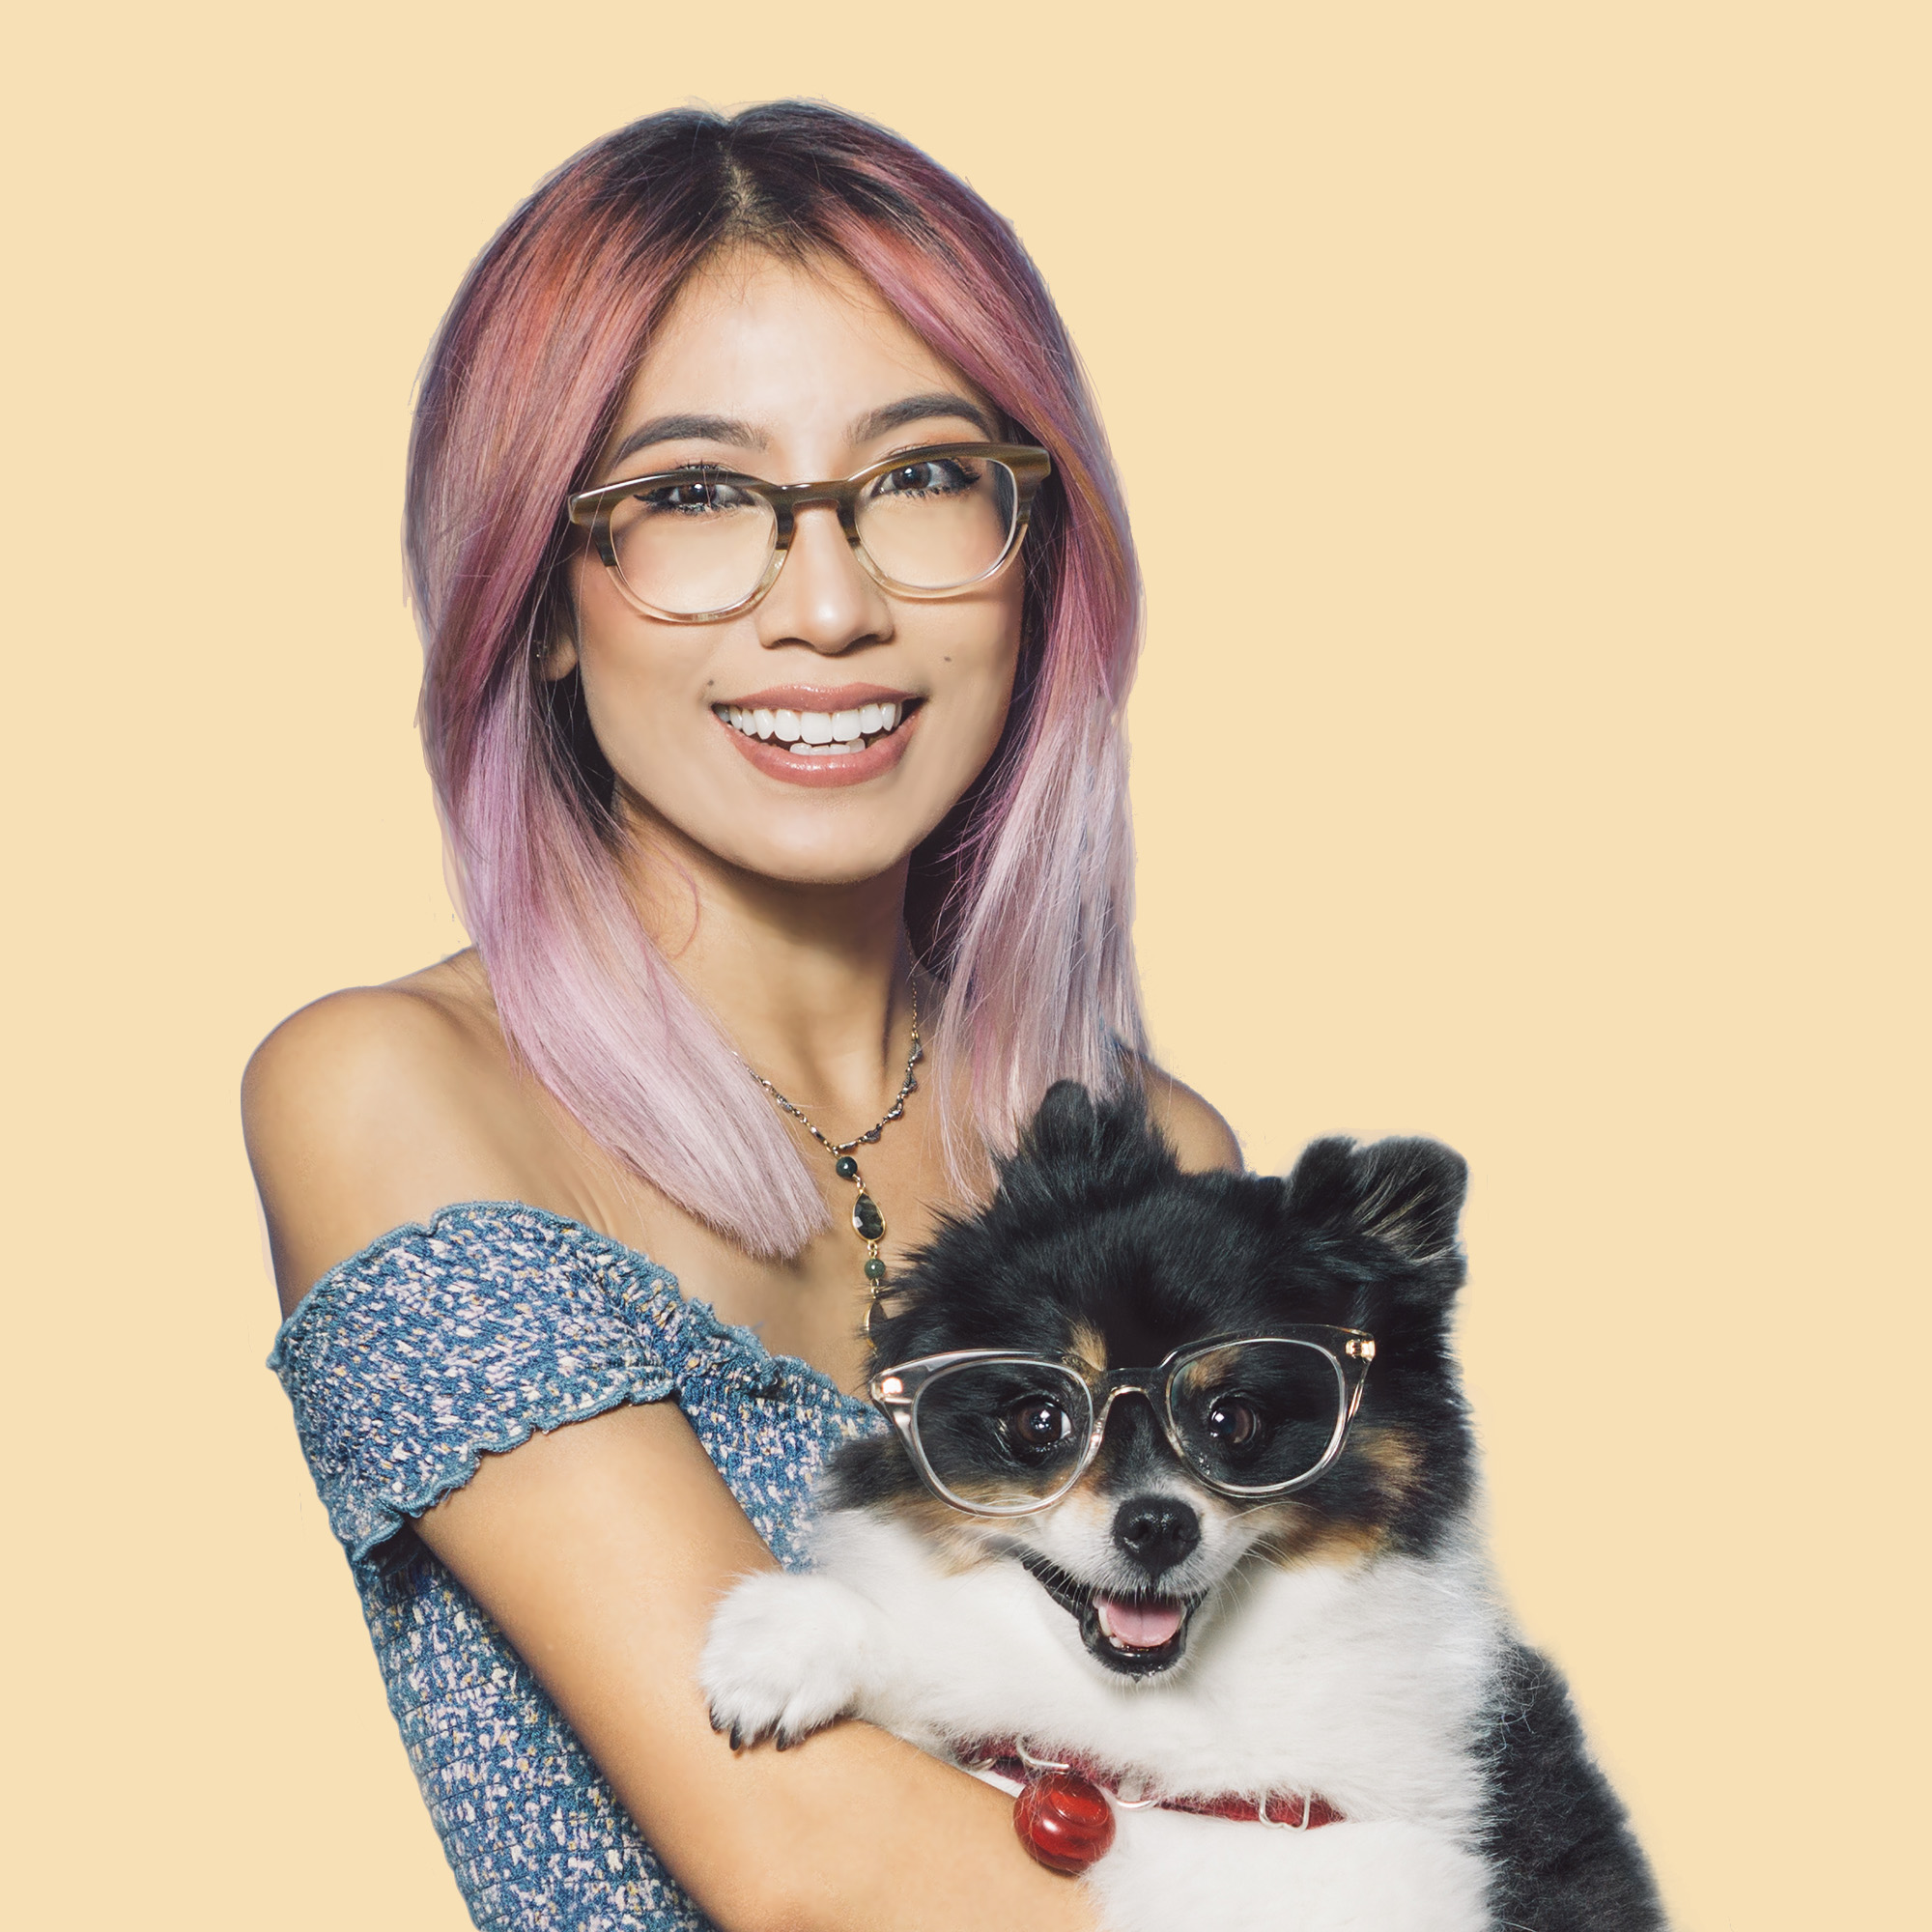  Sharing the eyewear love with our pup, Layla! 